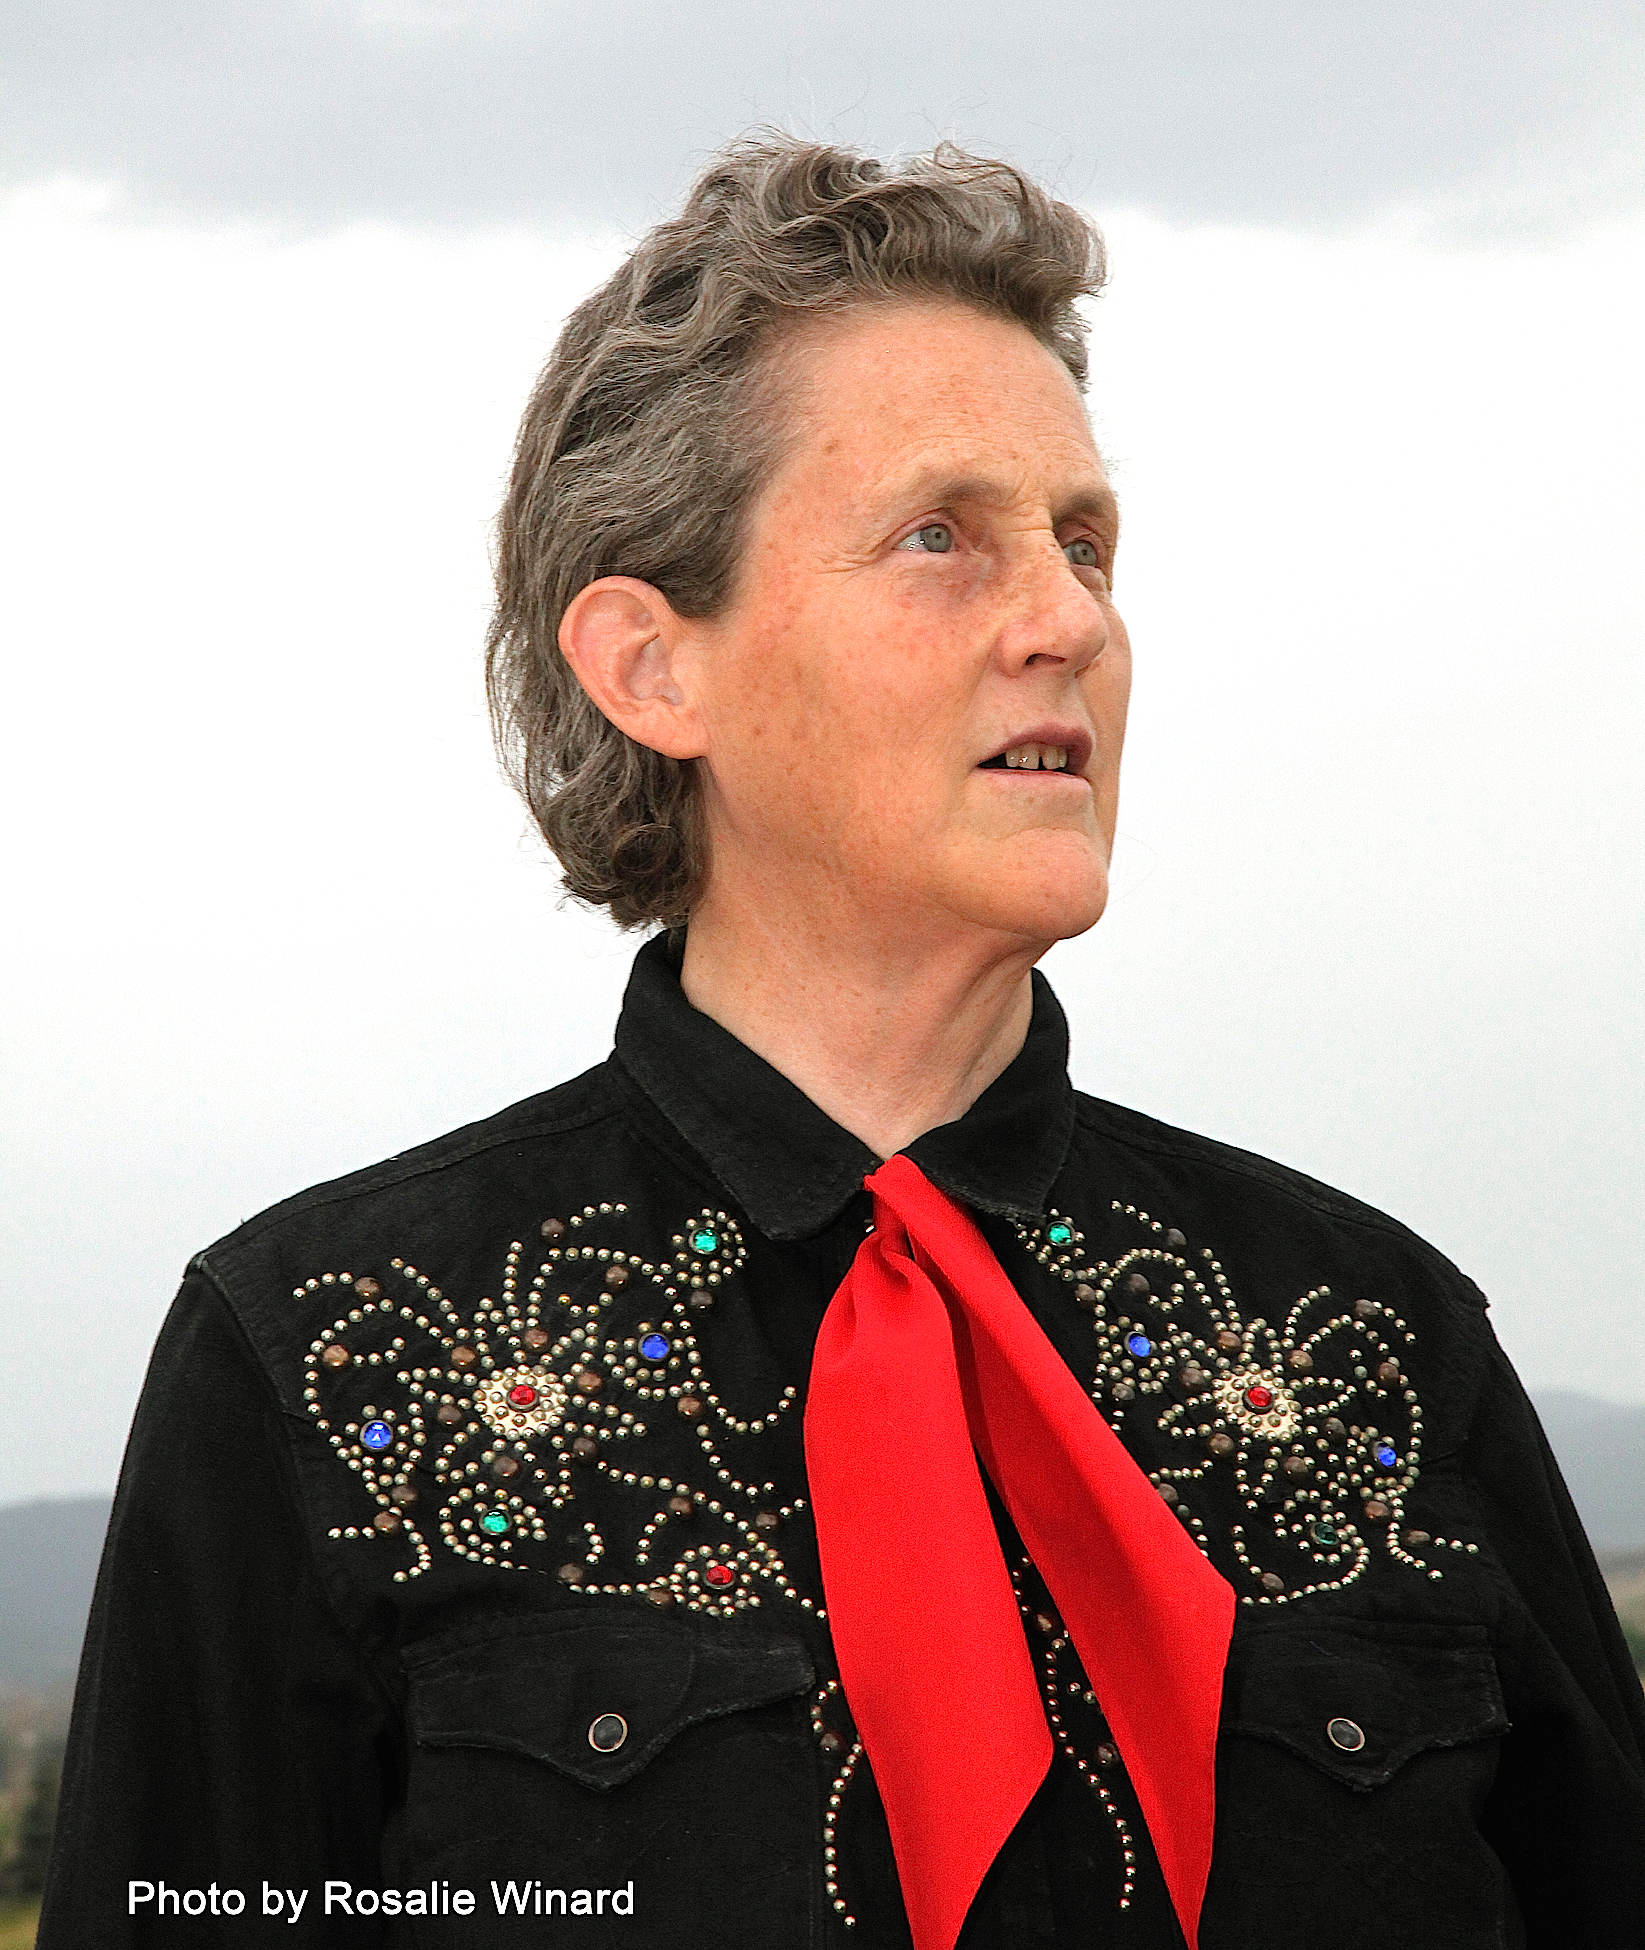 Internationally acclaimed scientist & speaker, Dr. Temple Grandin, will speak at on Sunday, Sept. 6th at Rocky Mountain STEAM Fest, a 2-day Science, Technology, Entrepreneurship, Art and Making event.